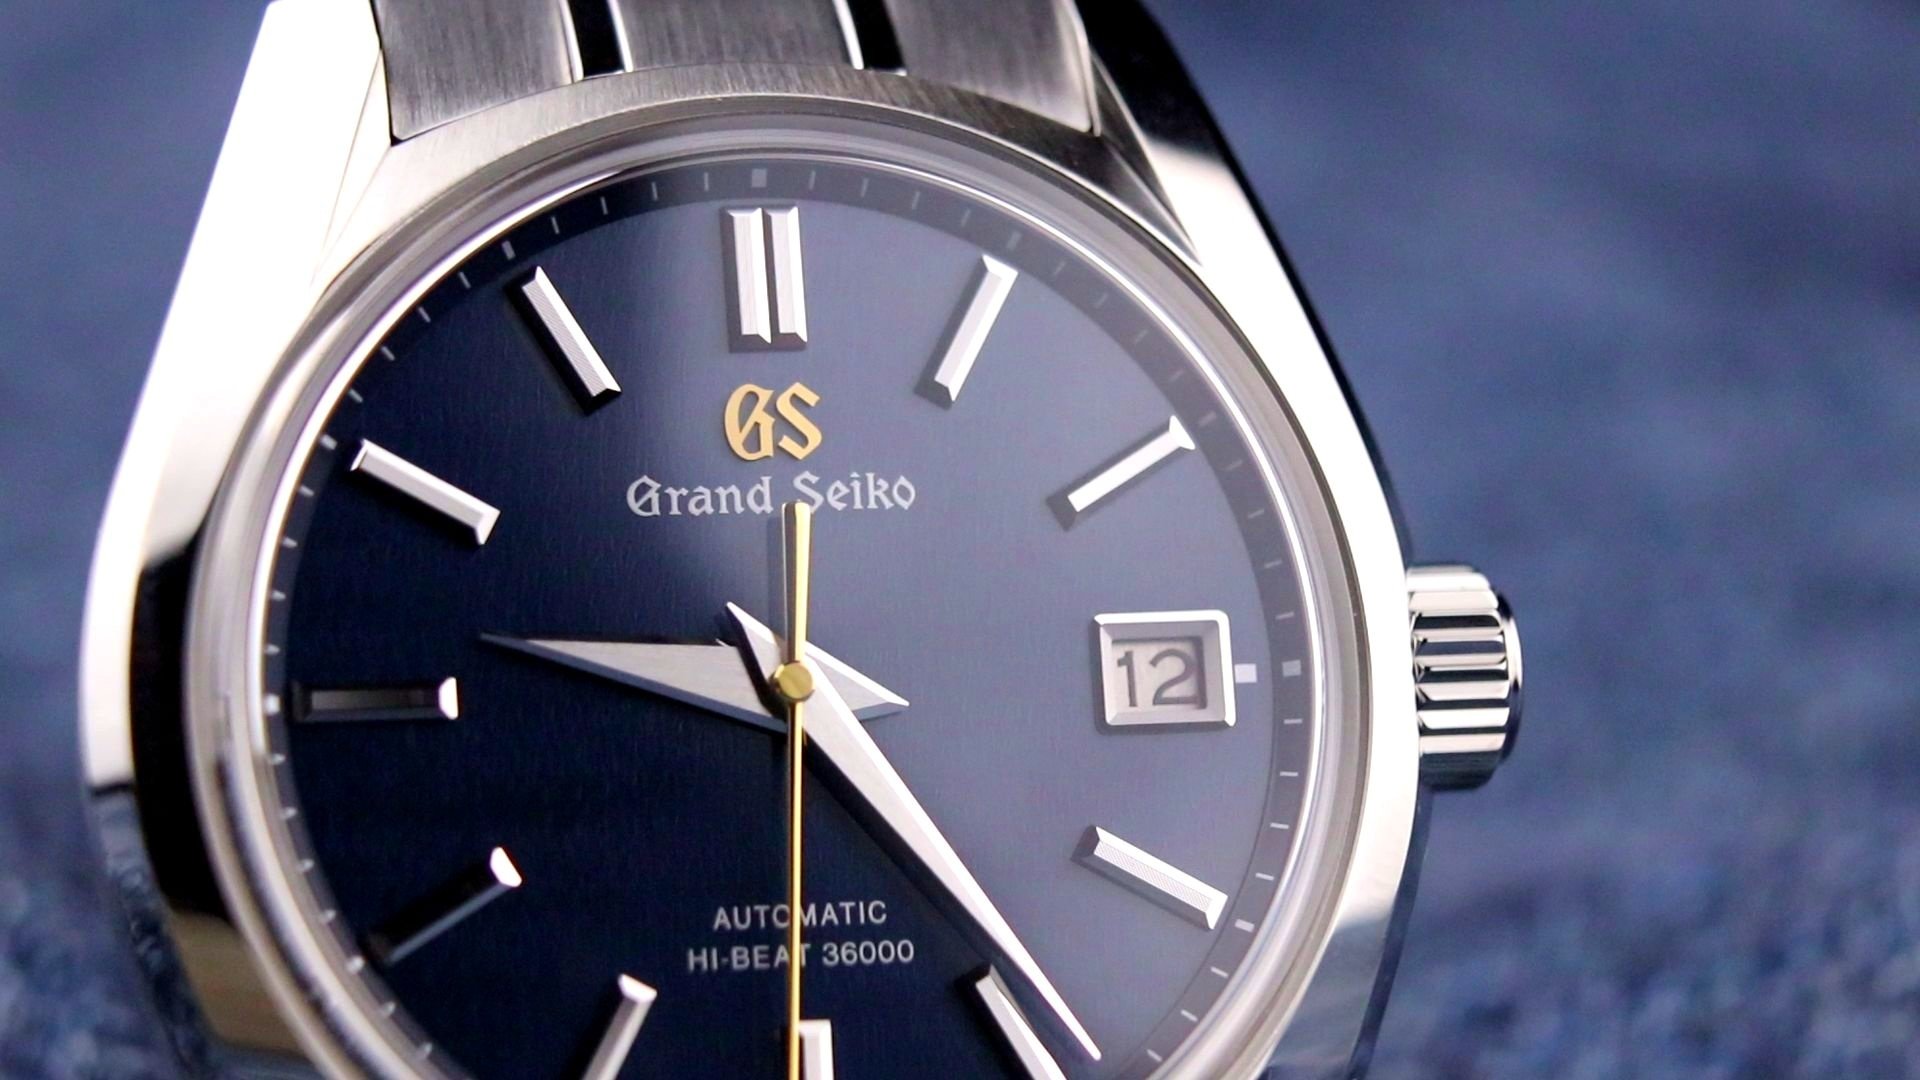 Grand Seiko SBGH273 “Fall” Review, Four Seasons Collection Review